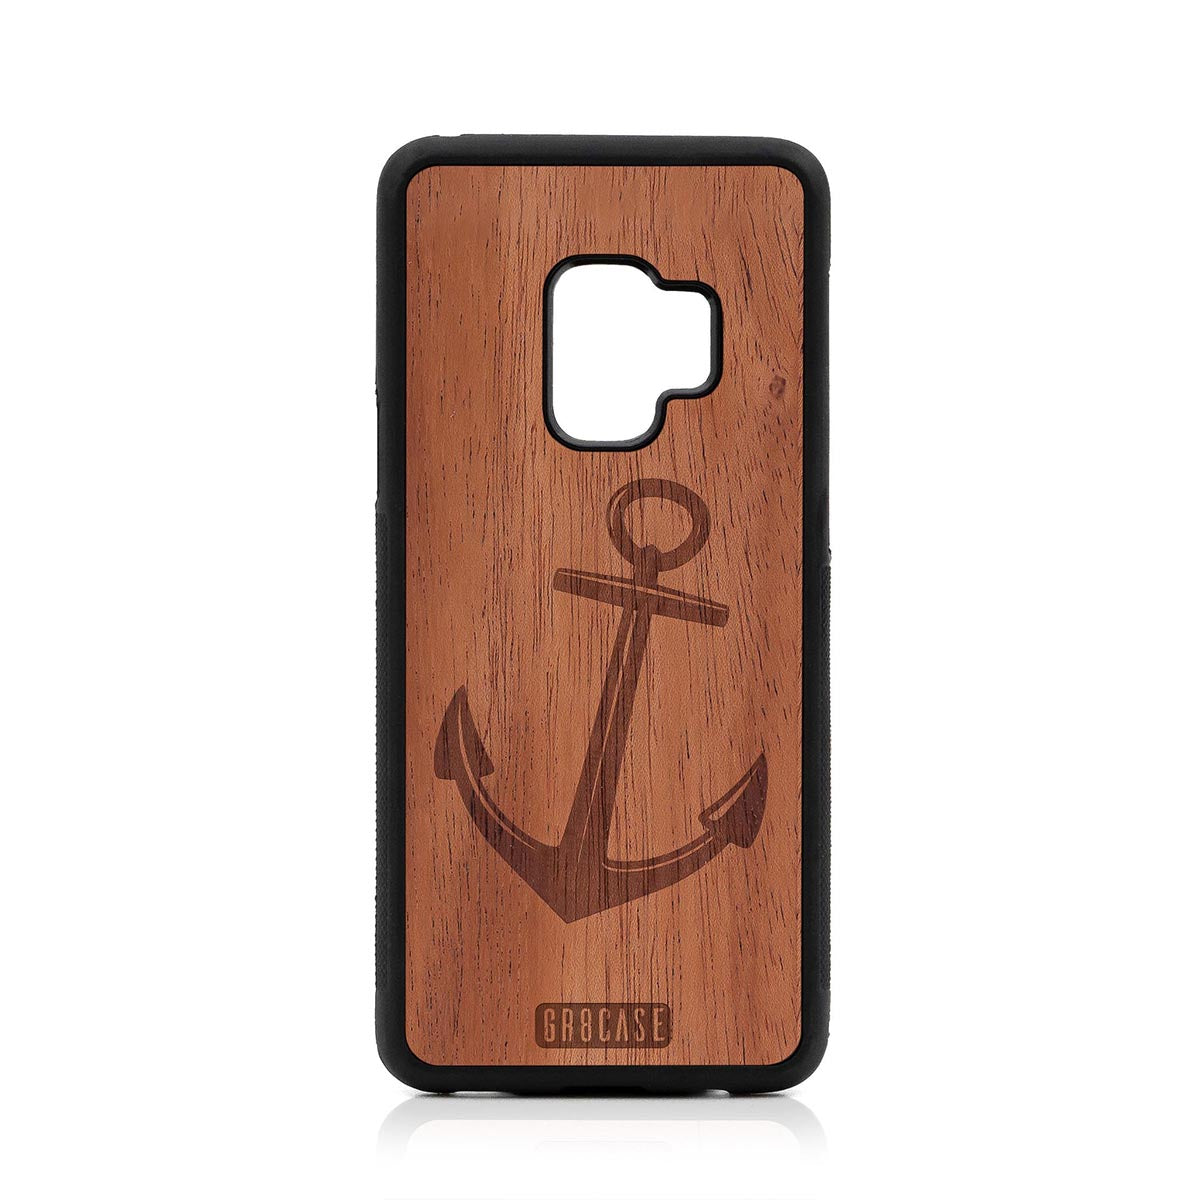 Anchor Design Wood Case For Samsung Galaxy S9 by GR8CASE